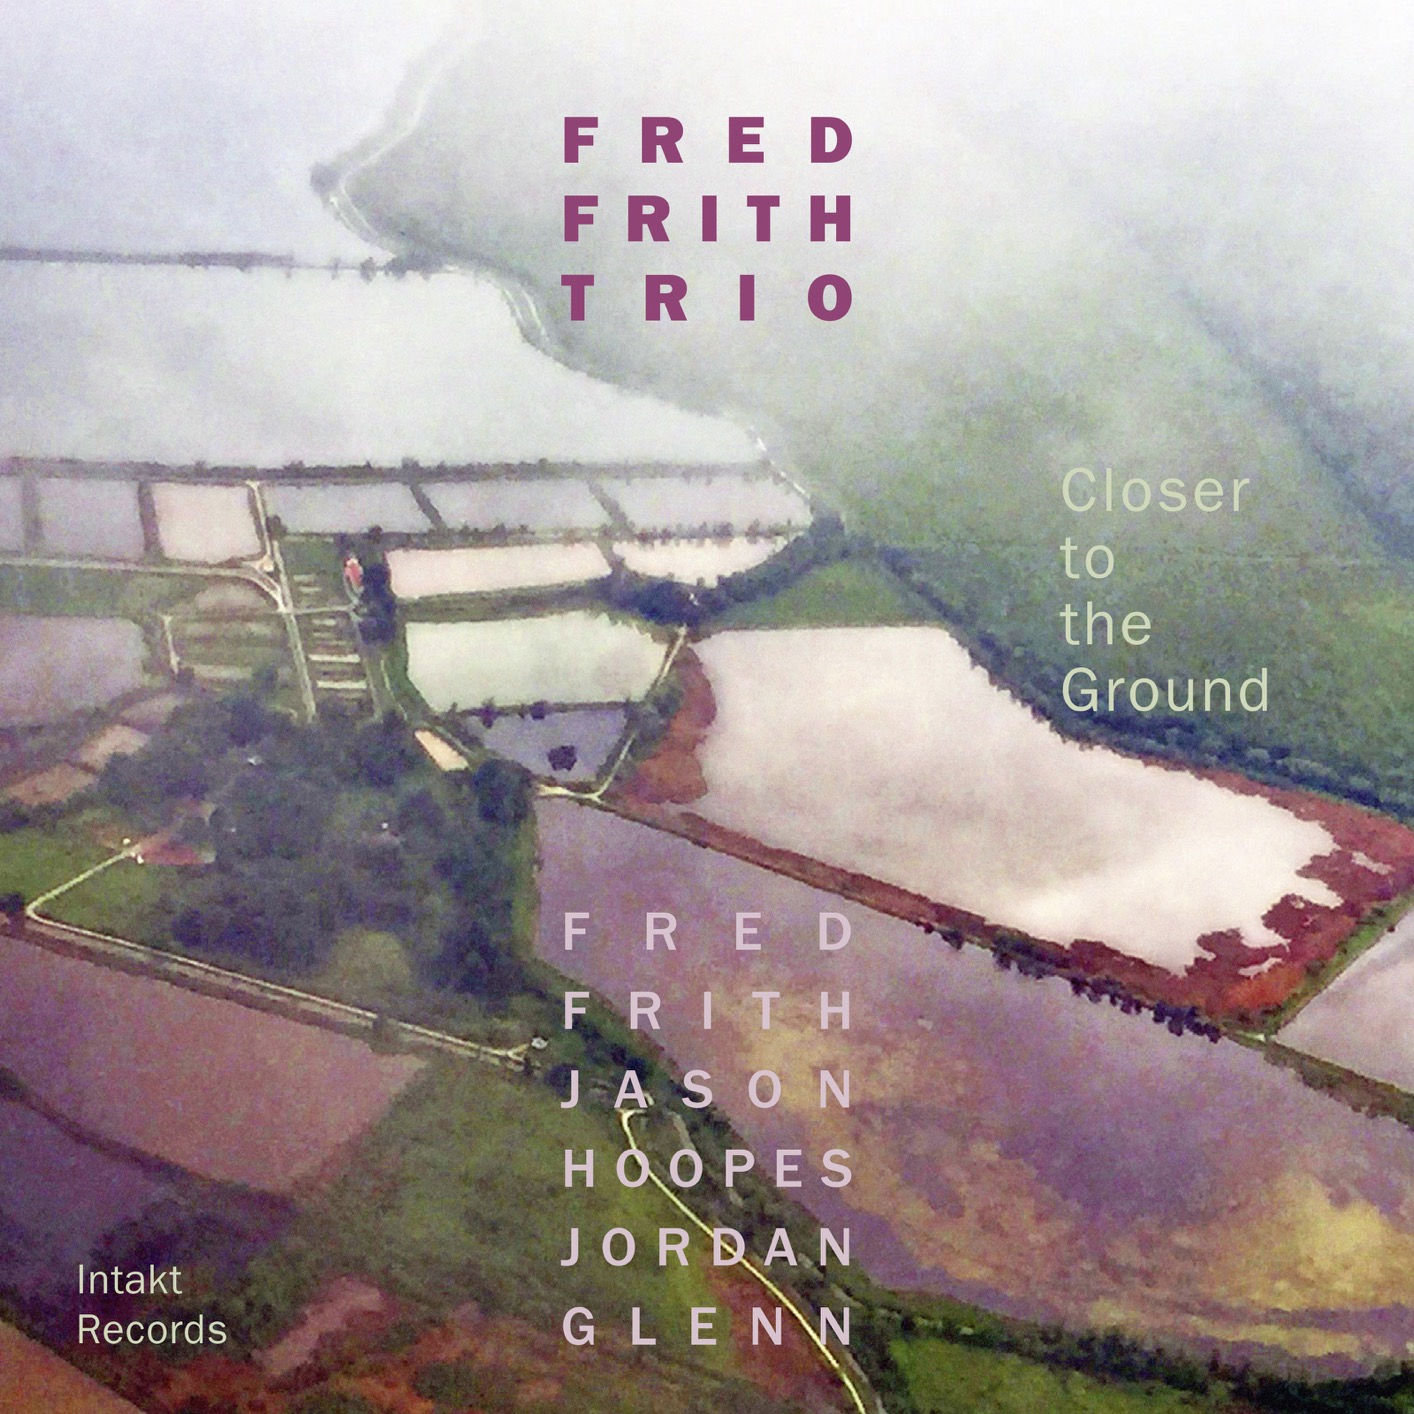 Fred Frith Trio – Closer to the Ground (2018) [FLAC 24bit/44,1kHz]